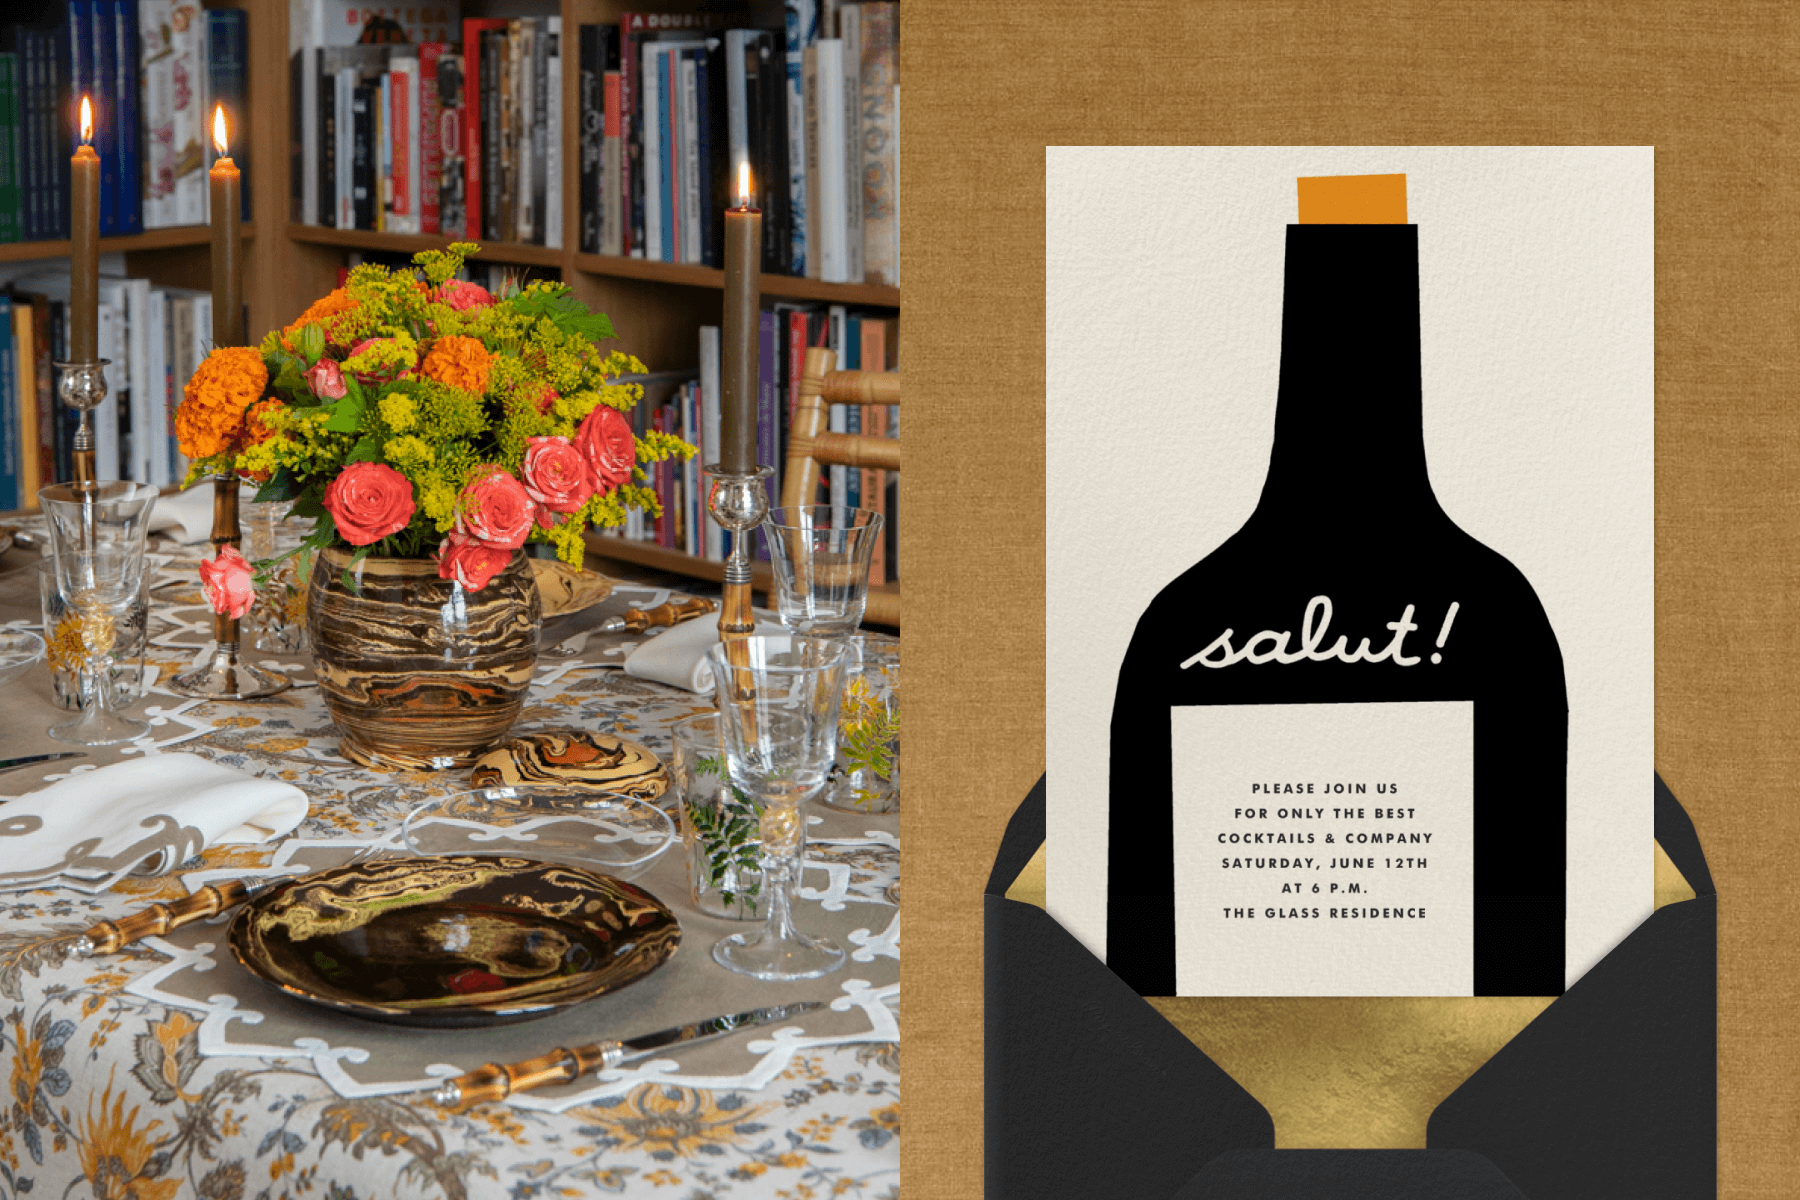 Left: Dinner table set with a yellow and white floral tablecloth, ceramic plates, and a pink and yellow flower arrangement. Right: Dinner invitation featuring a black wine bottle with text, coming out of. a black and gold envelope. 